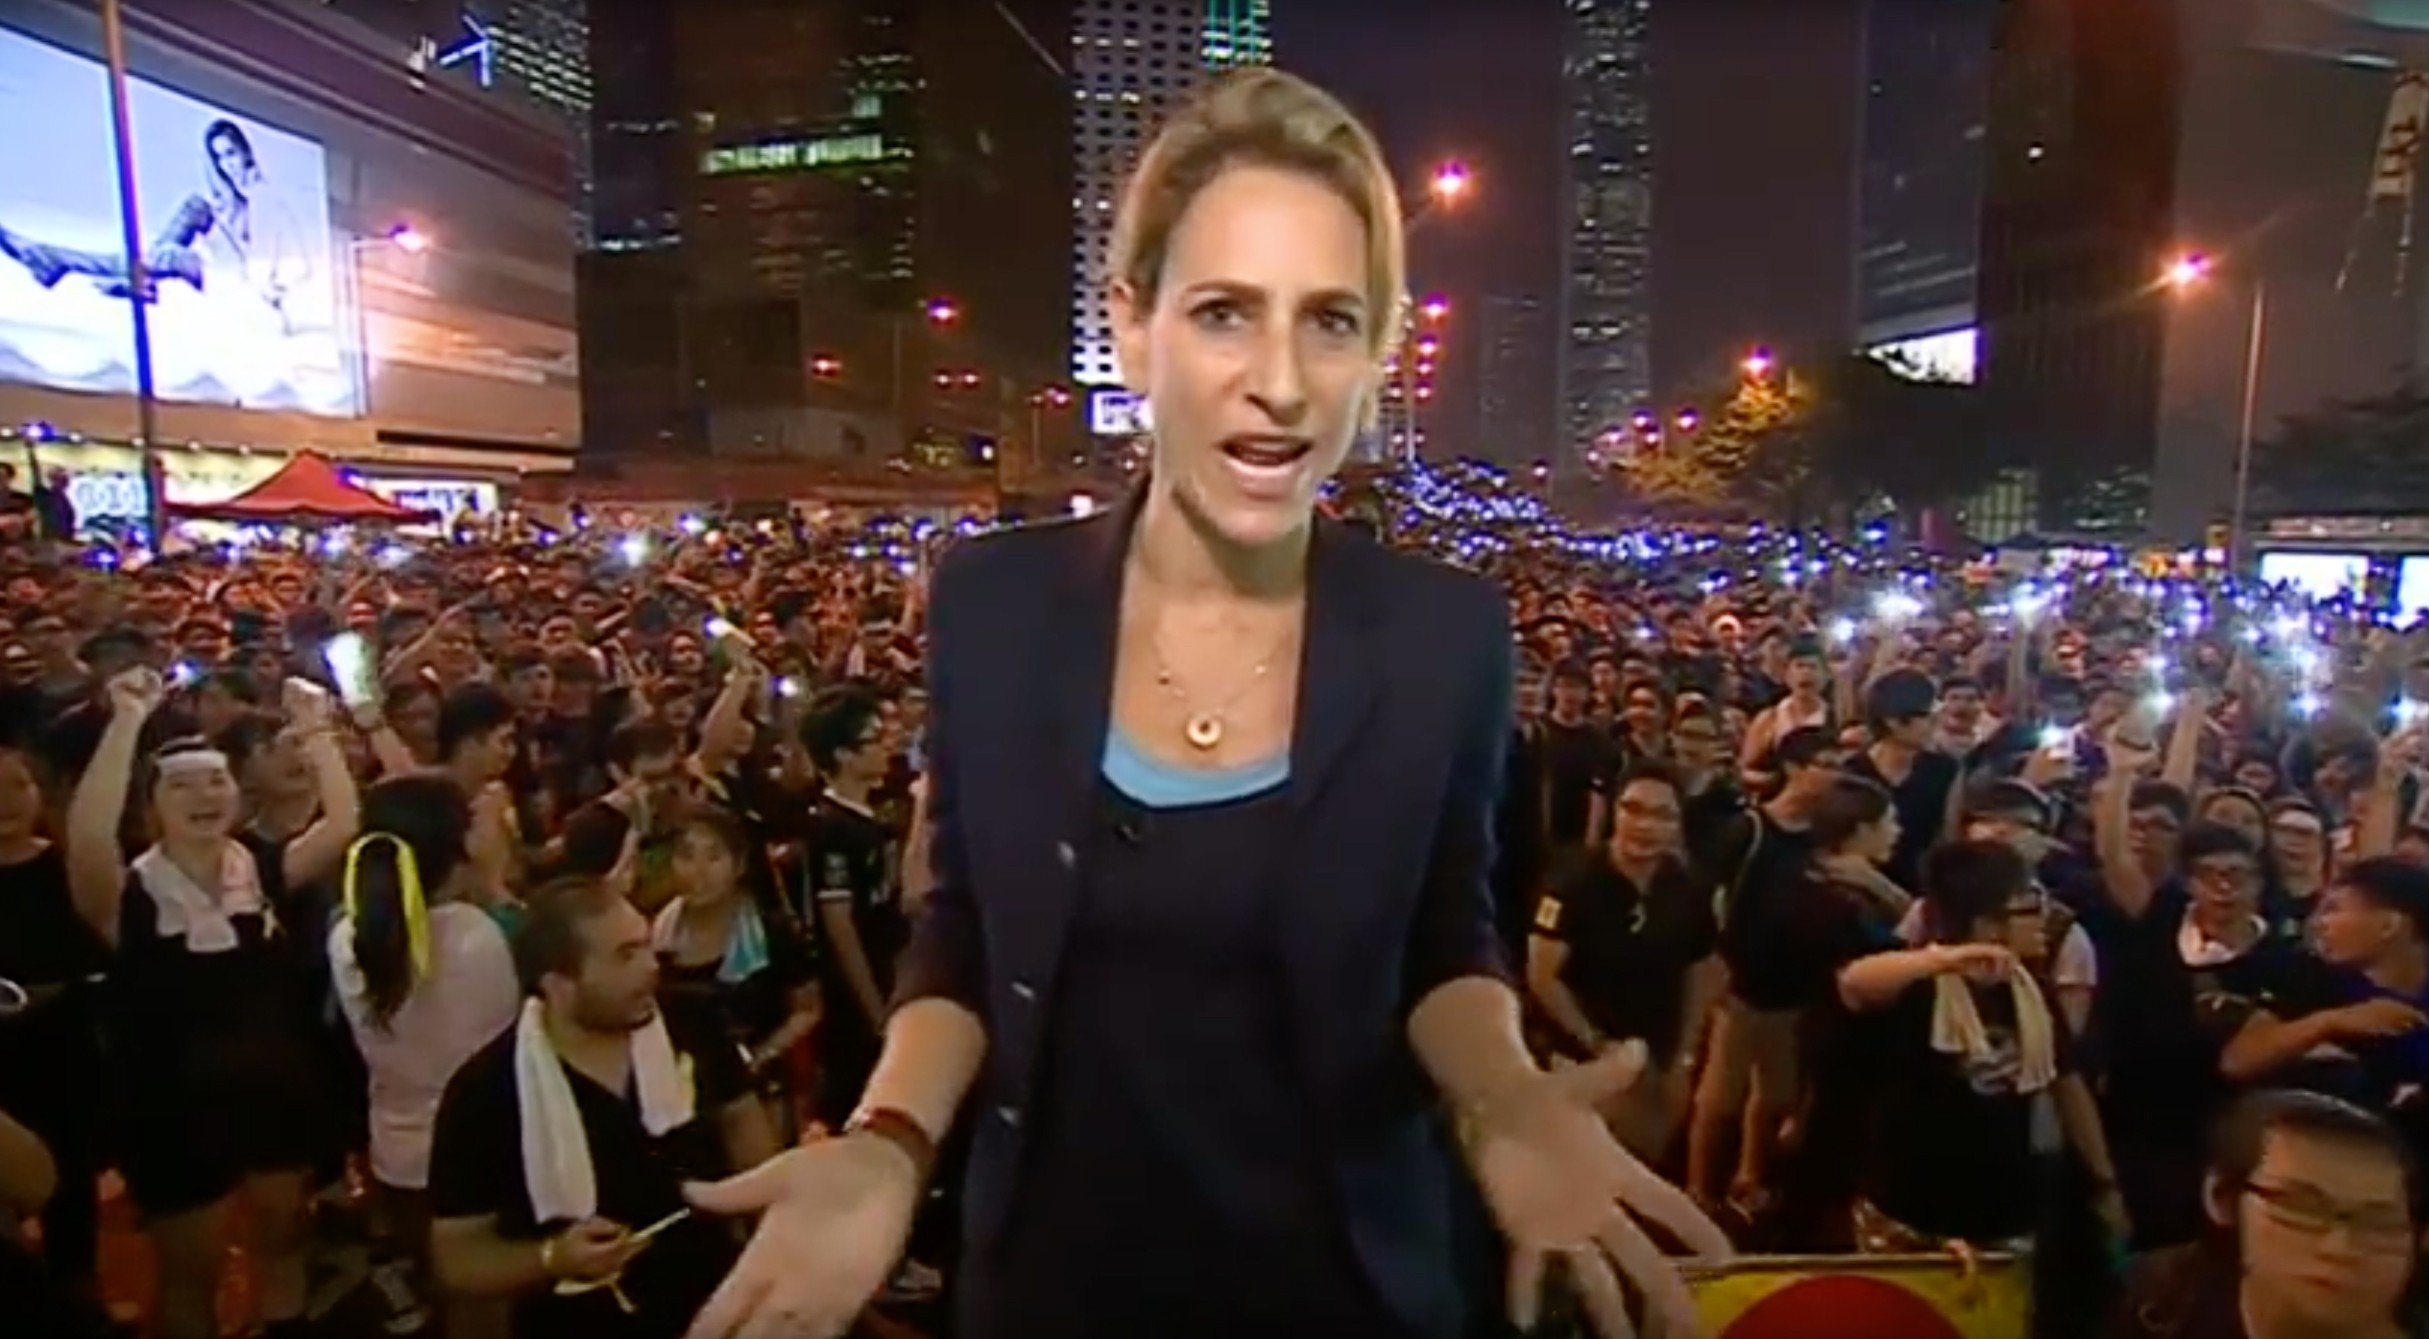 BBC Newsnight presenter Emily Maitlis covering Hong Kong’s “umbrella movement” protests for the BBC, in Admiralty, in 2014. Photo: BBC